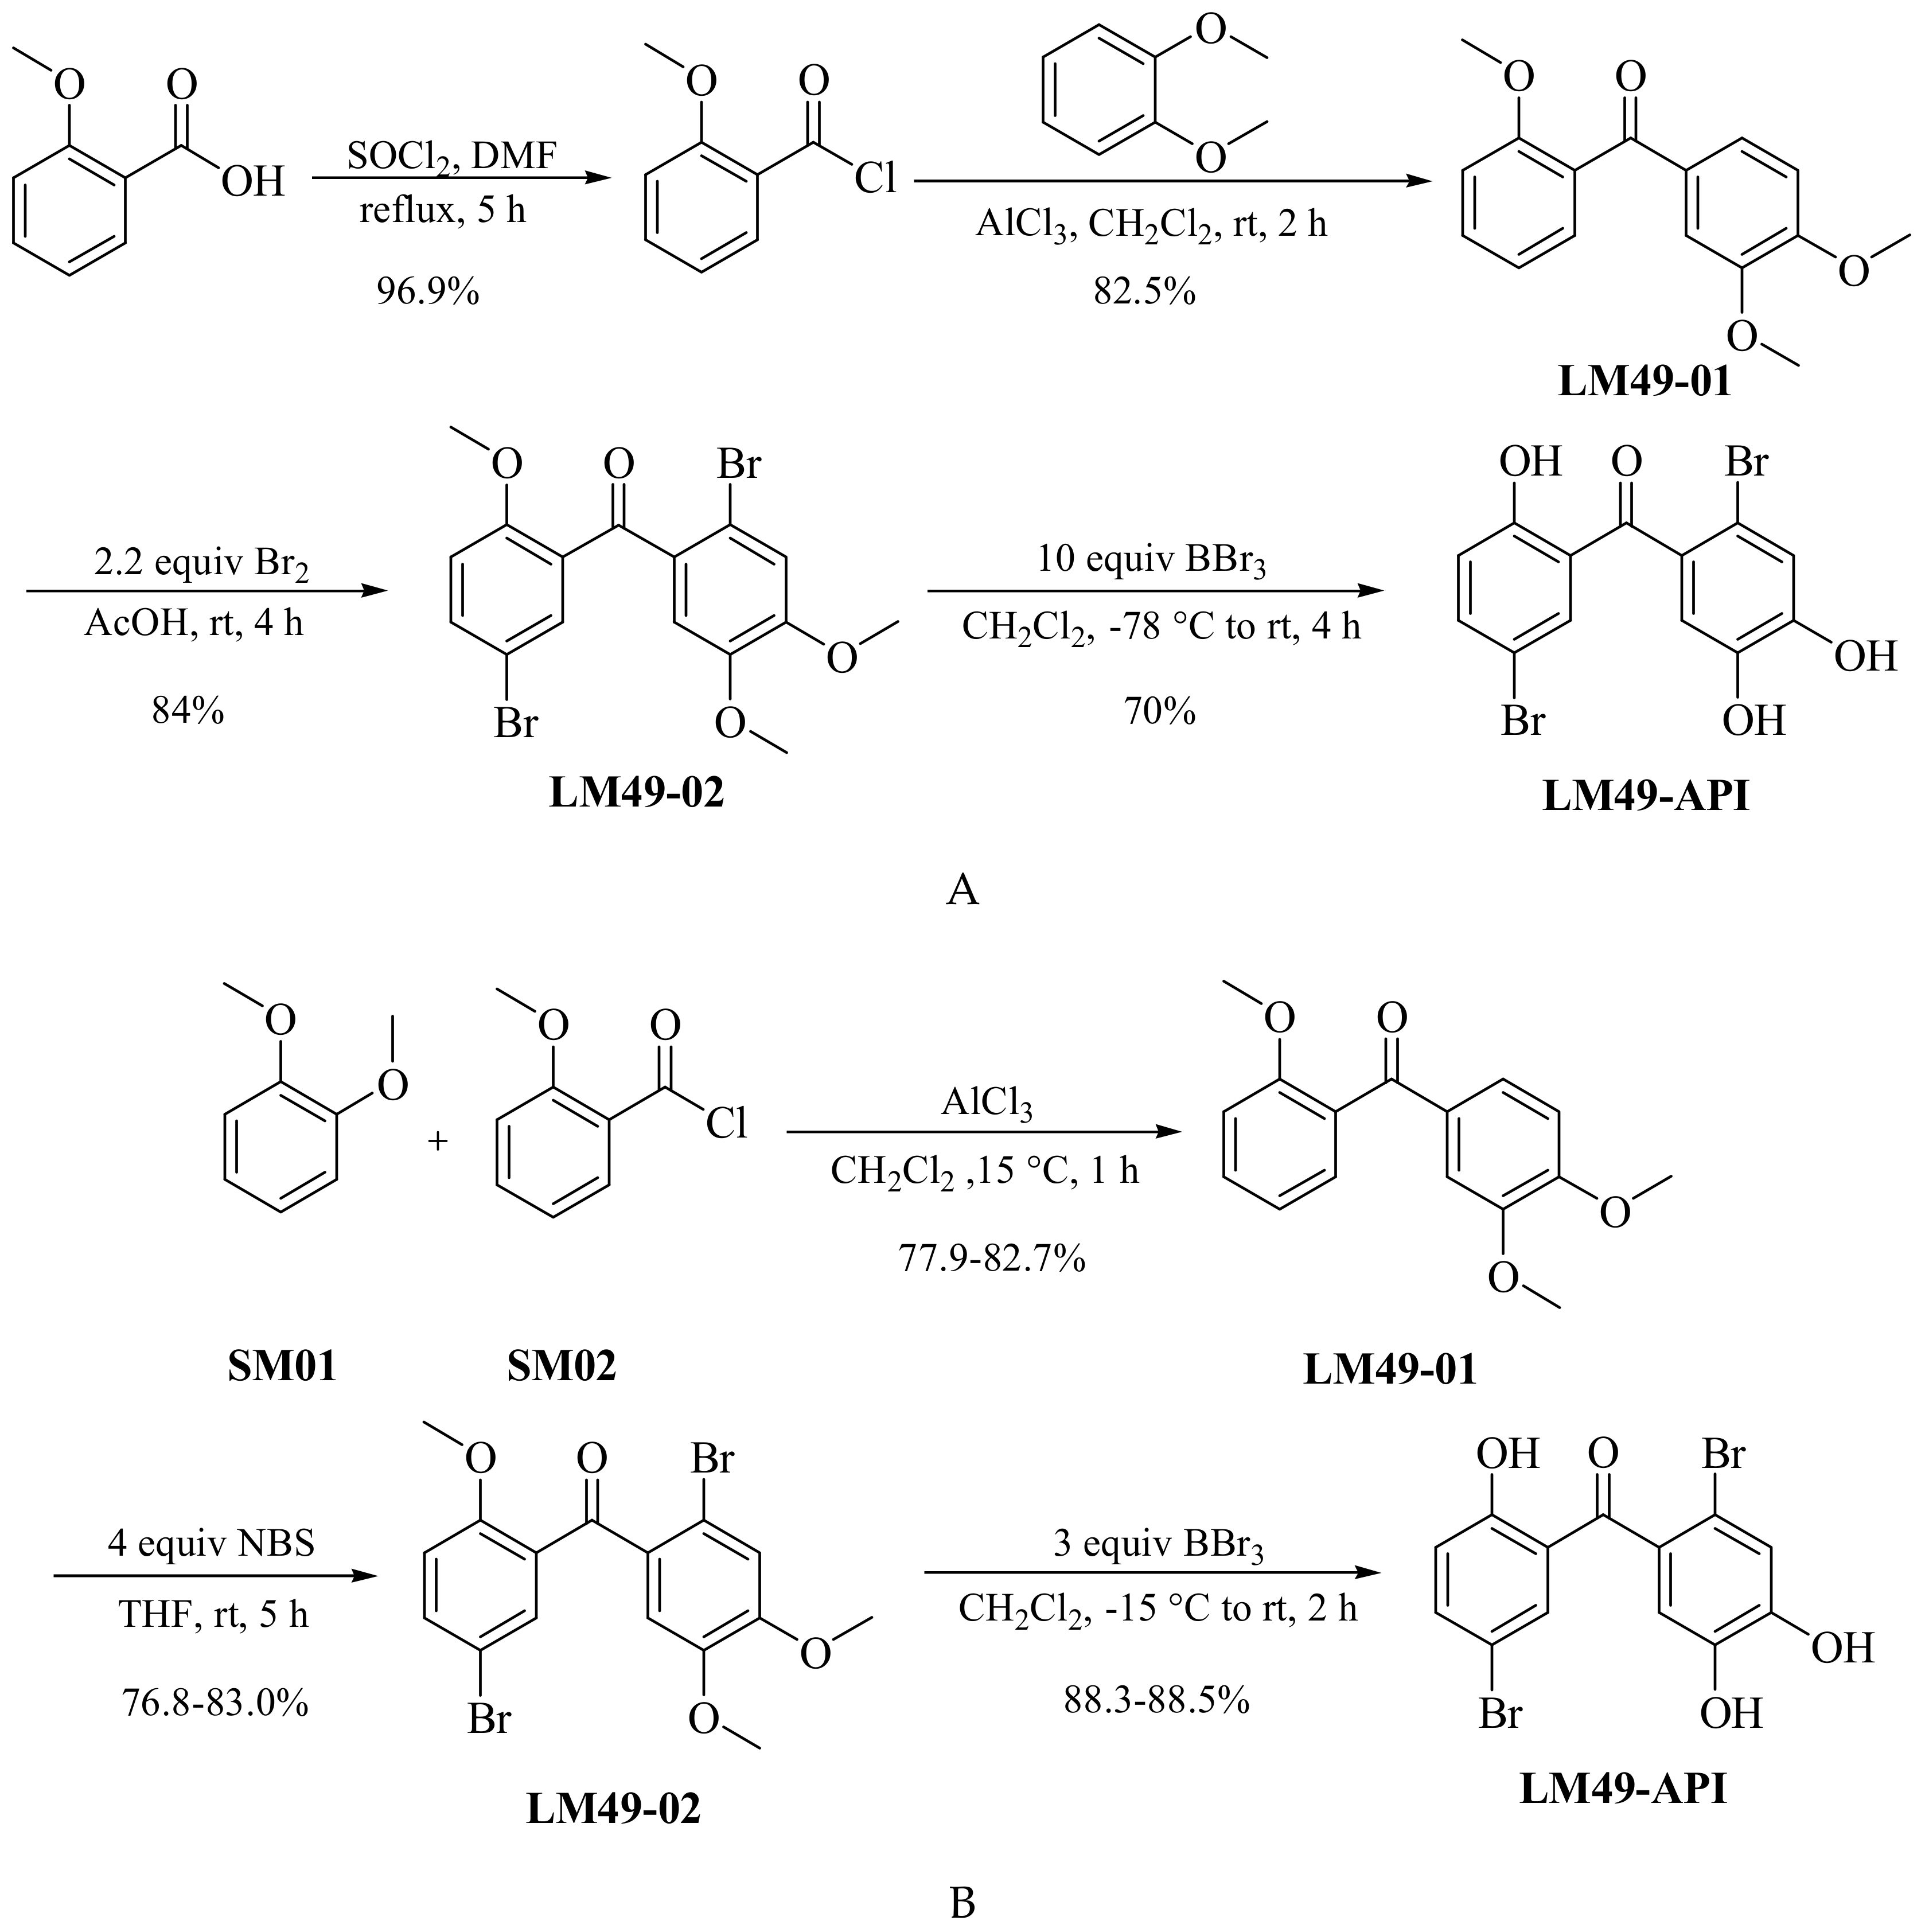 Molecules Free Full Text Process Development And Synthesis Of Process Related Impurities Of An Efficient Scale Up Preparation Of 5 2 Dibromo 2 4 5 Trihydroxy Diphenylmethanone As A New Acute Pyelonephritis Candidate Drug Html